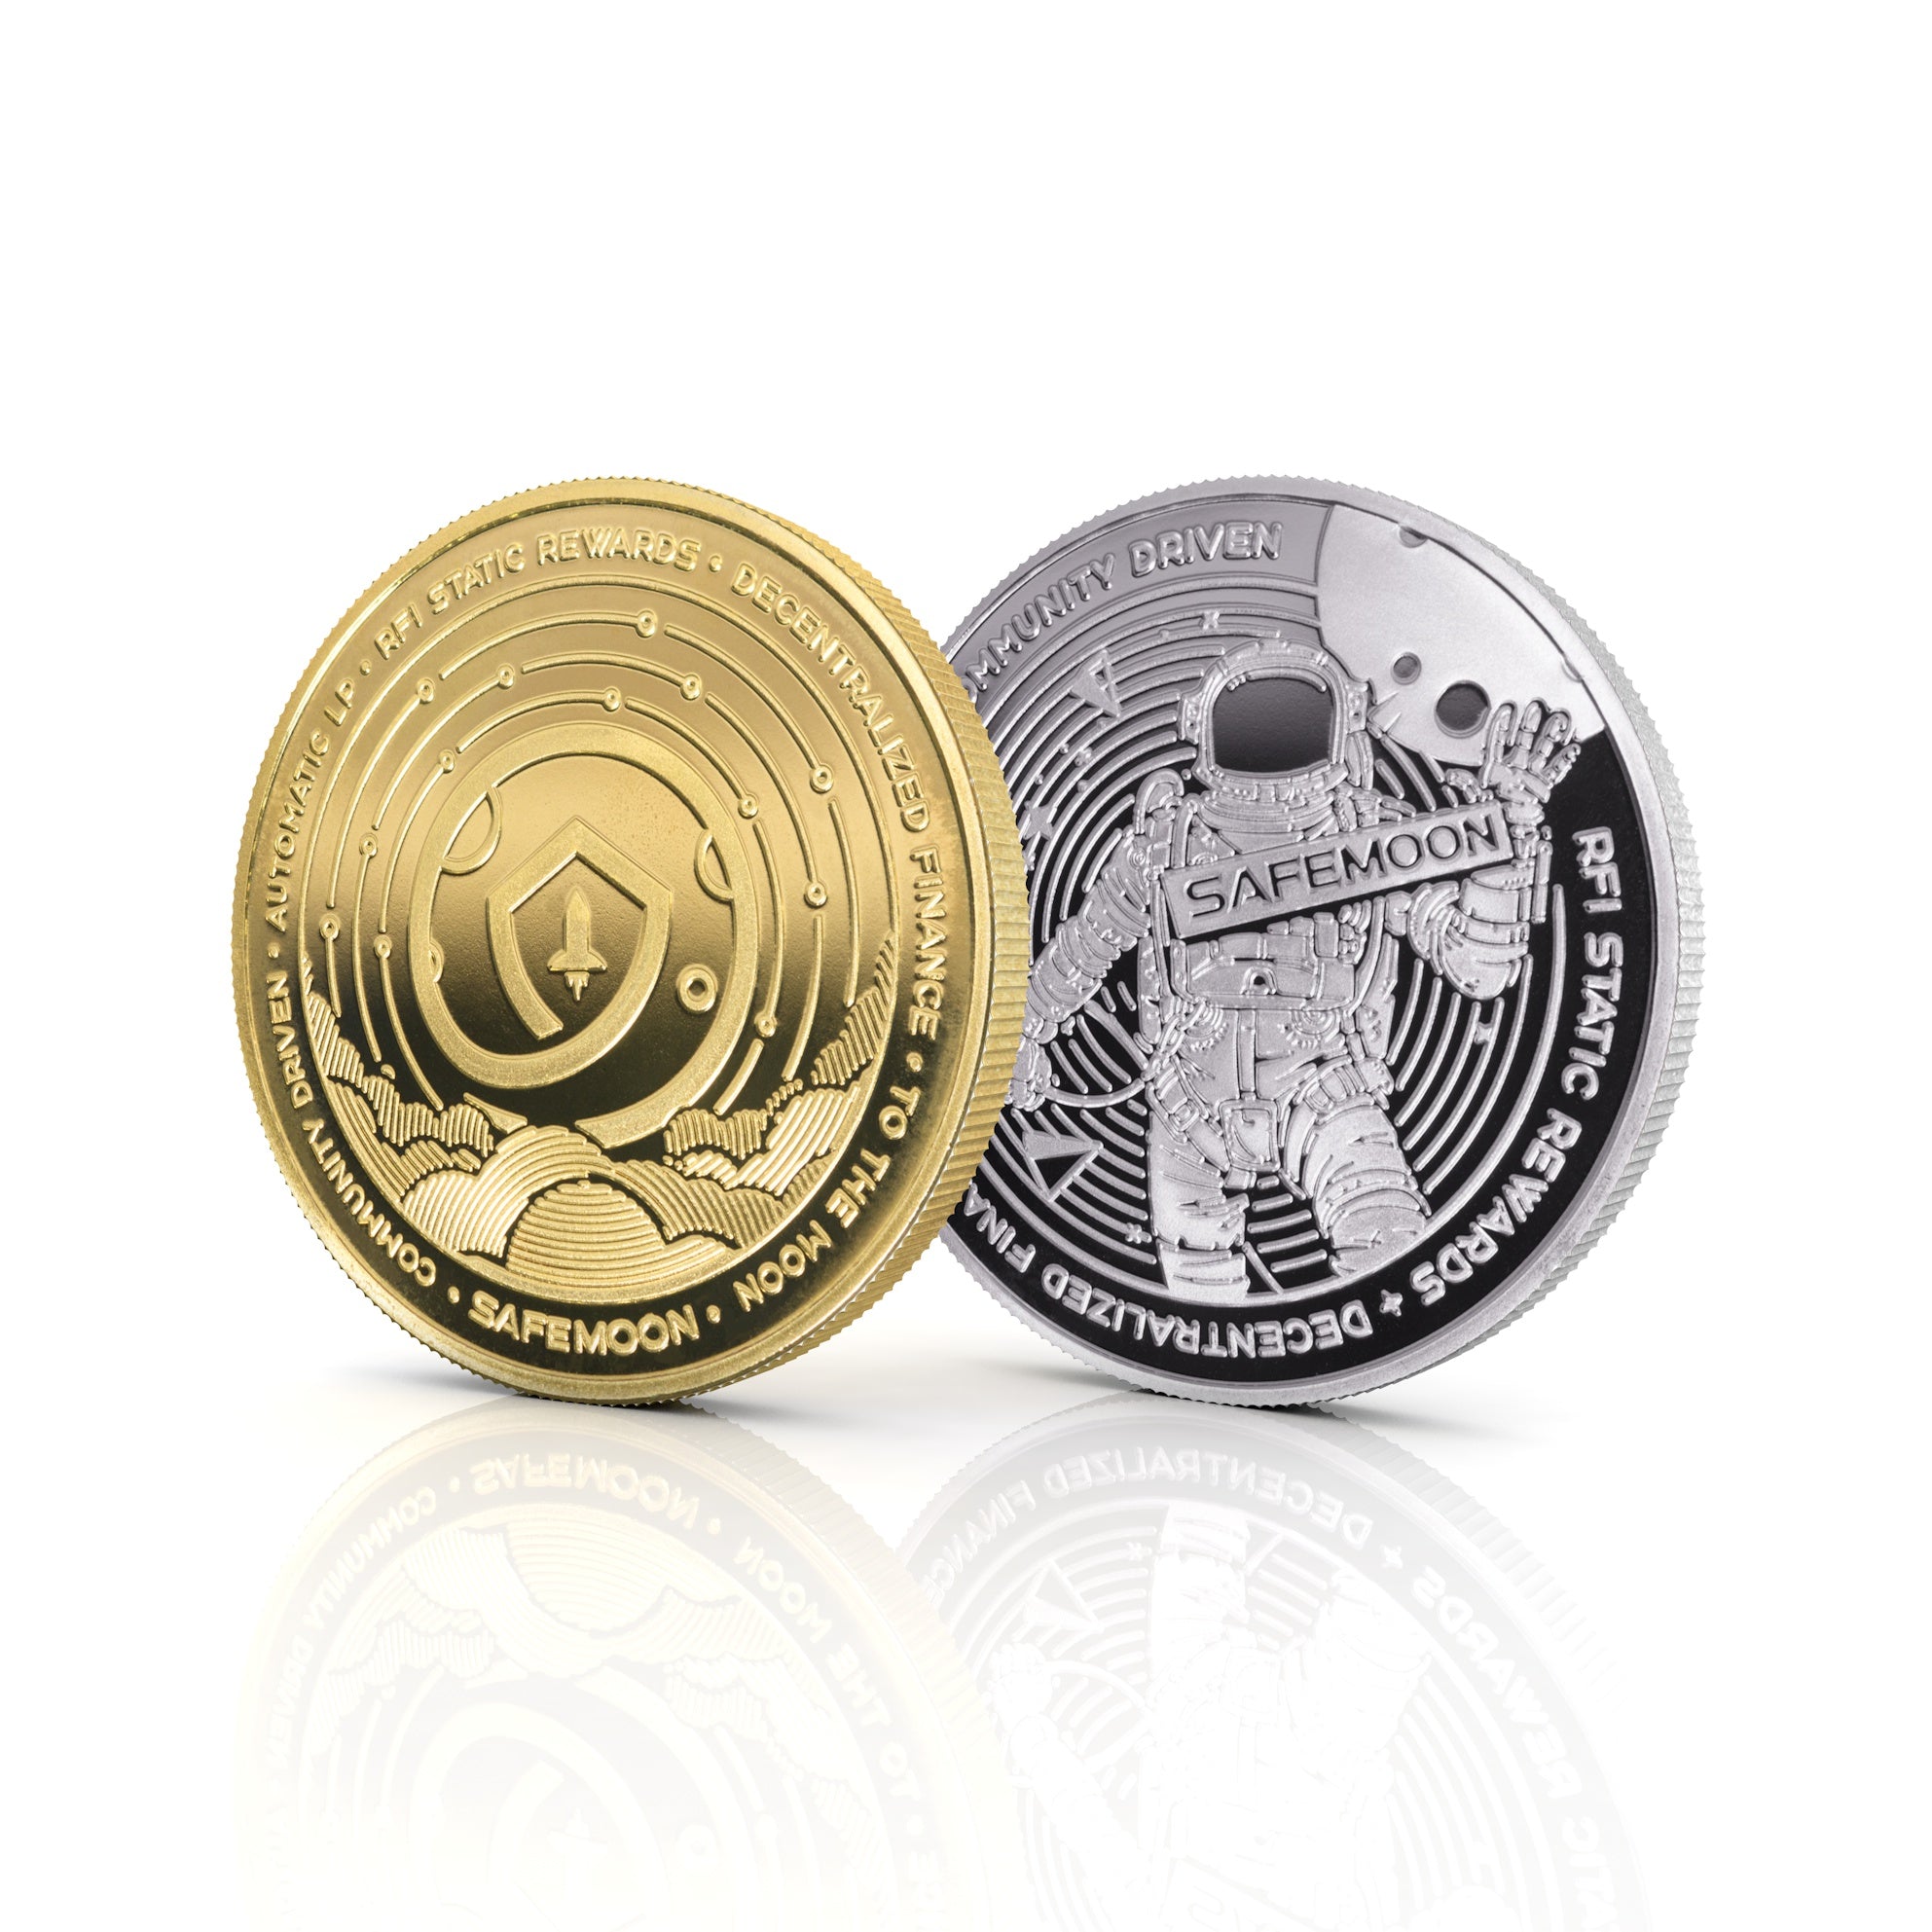 Cryptochips | SAFEMOON Physical Crypto Coin. Collectable cryptocurrency merch you can hodl